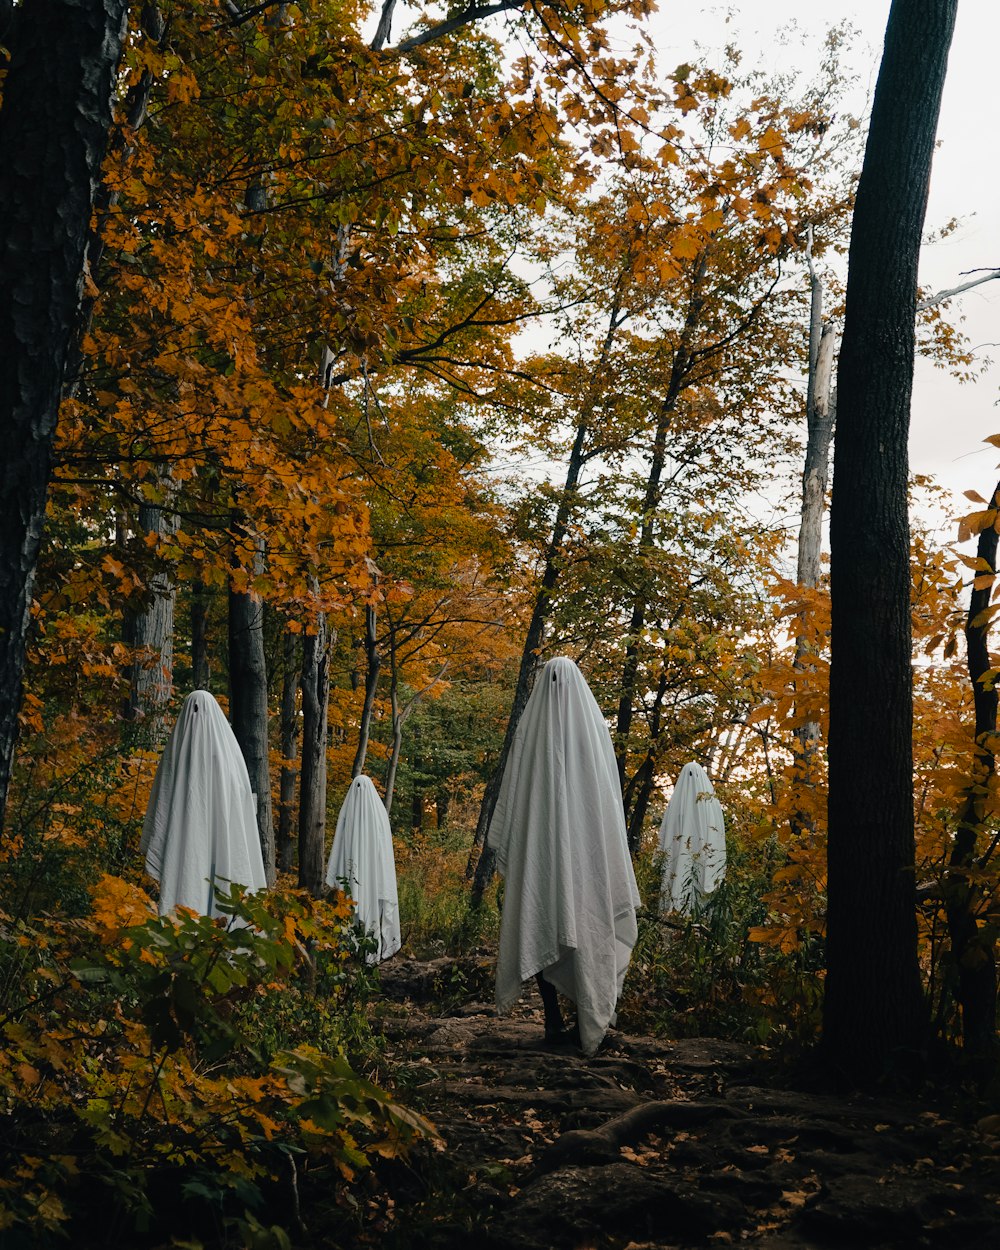 a group of white umbrellas in a forest